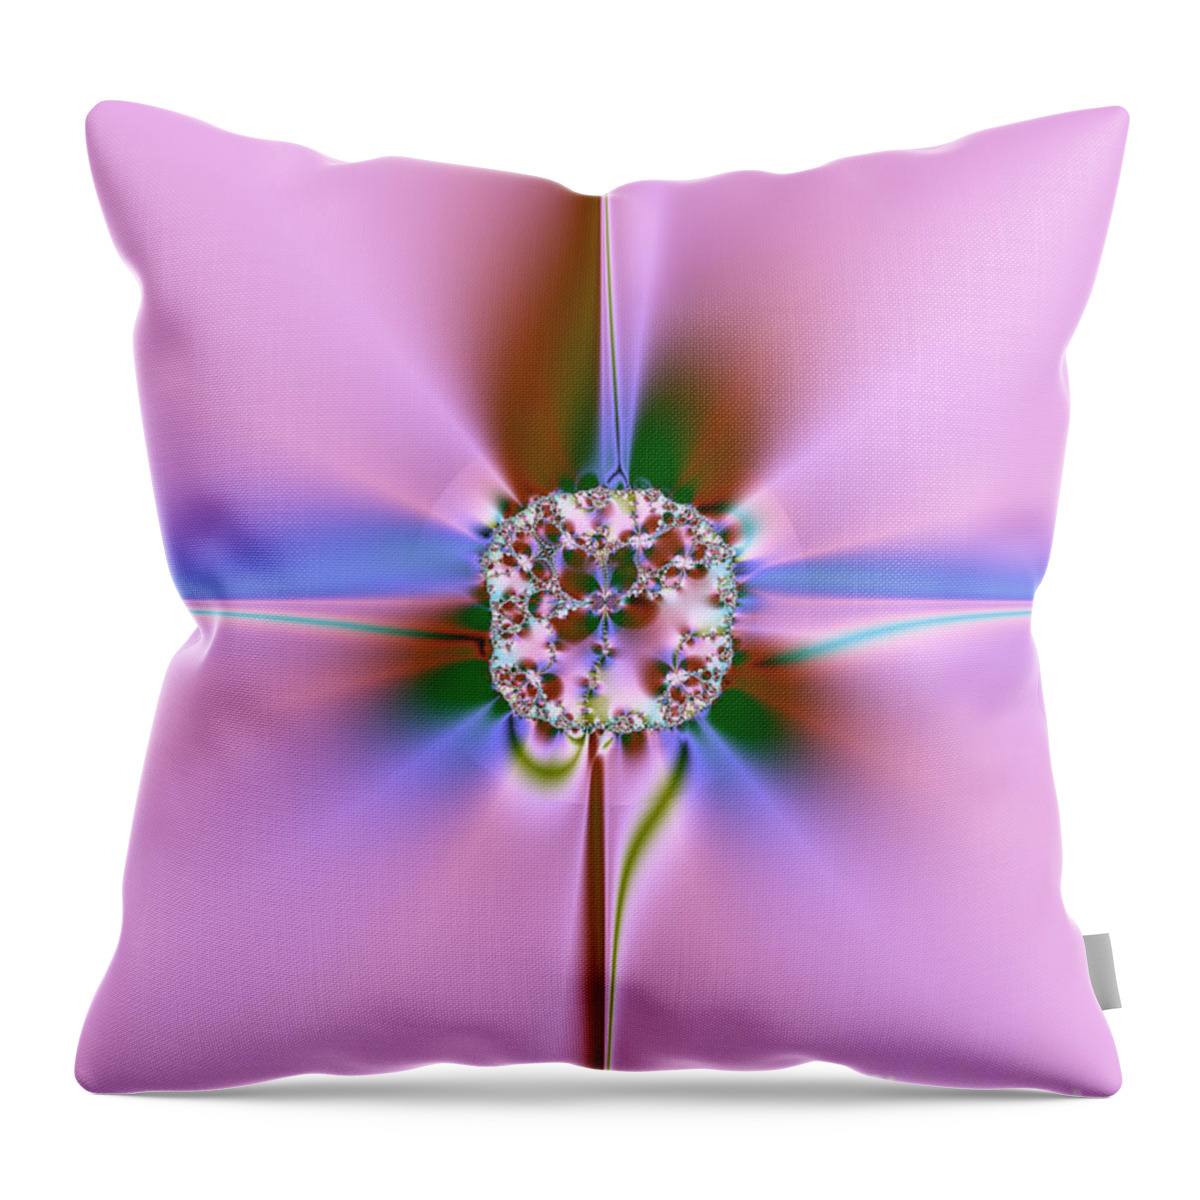 Abstract Throw Pillow featuring the digital art Jewel by Yvonne Johnstone